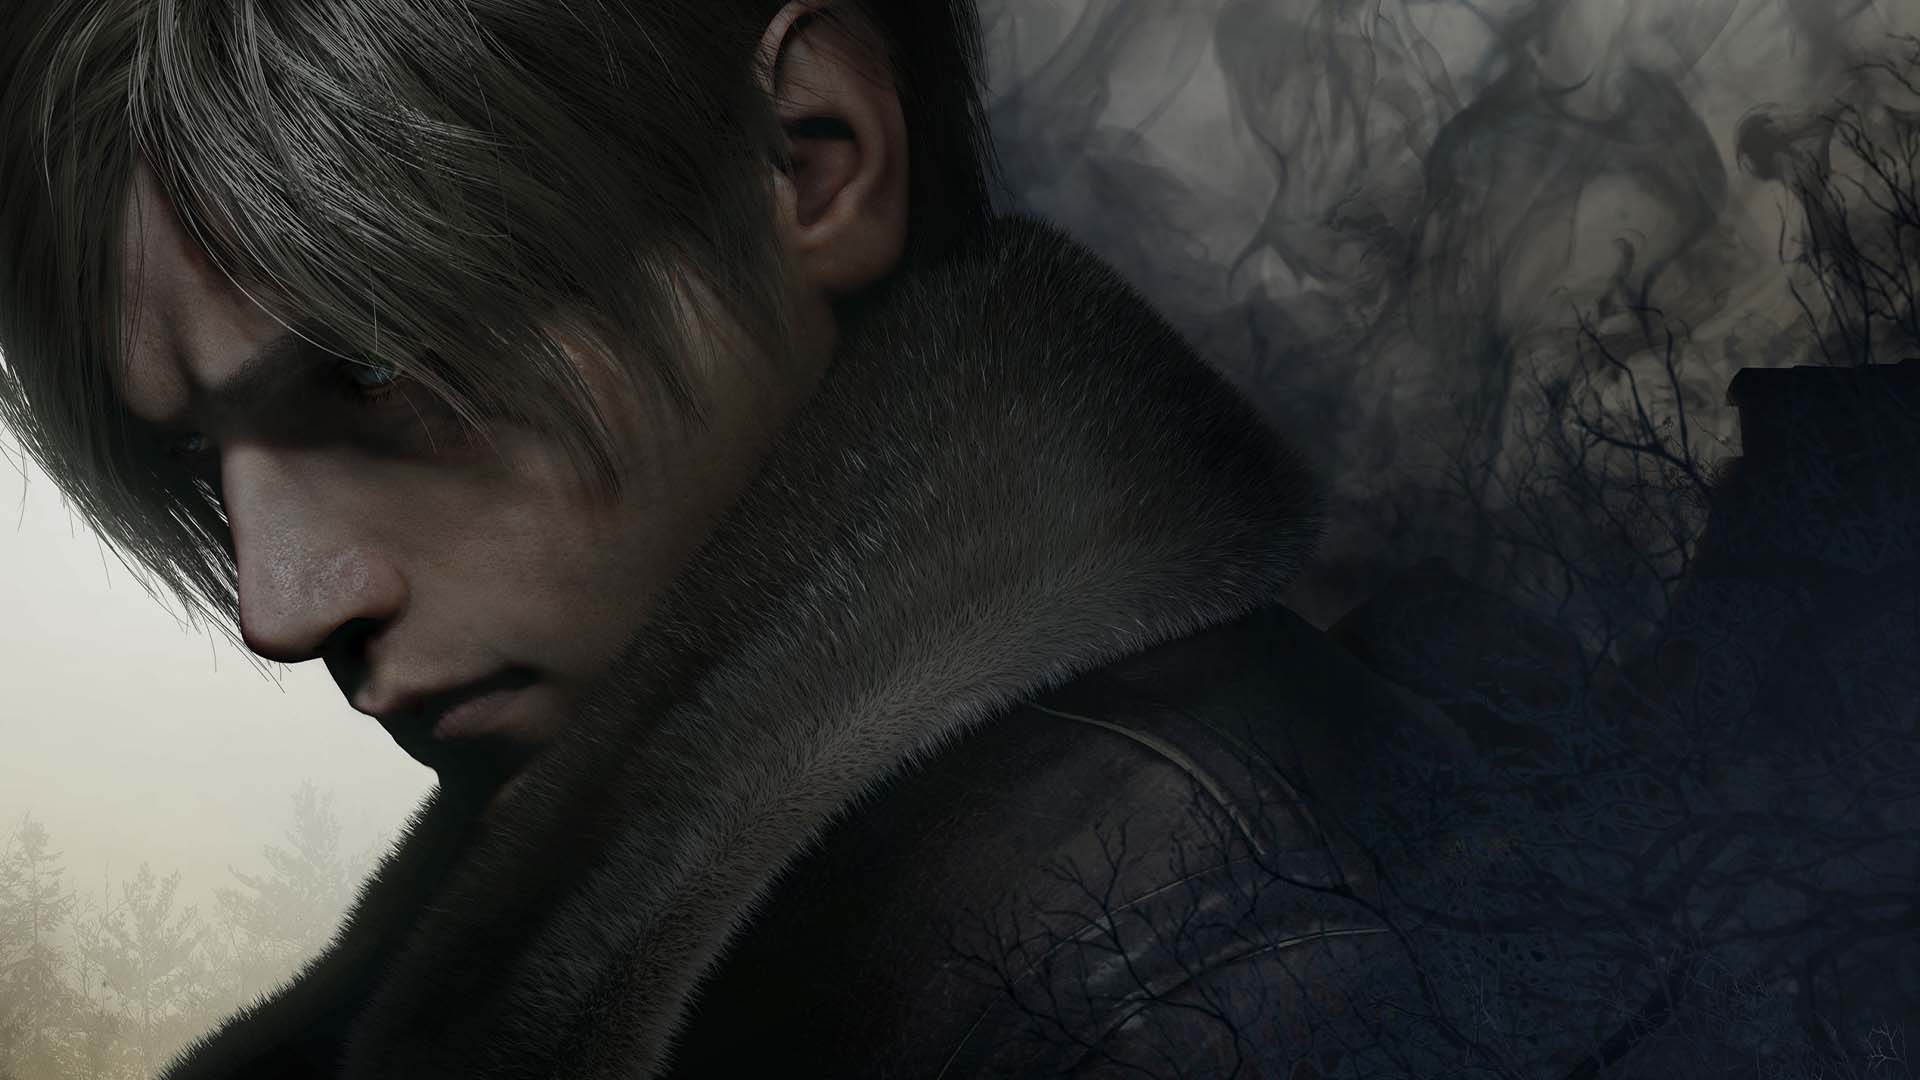 Resident Evil 4 review: exactly how a remake should be done